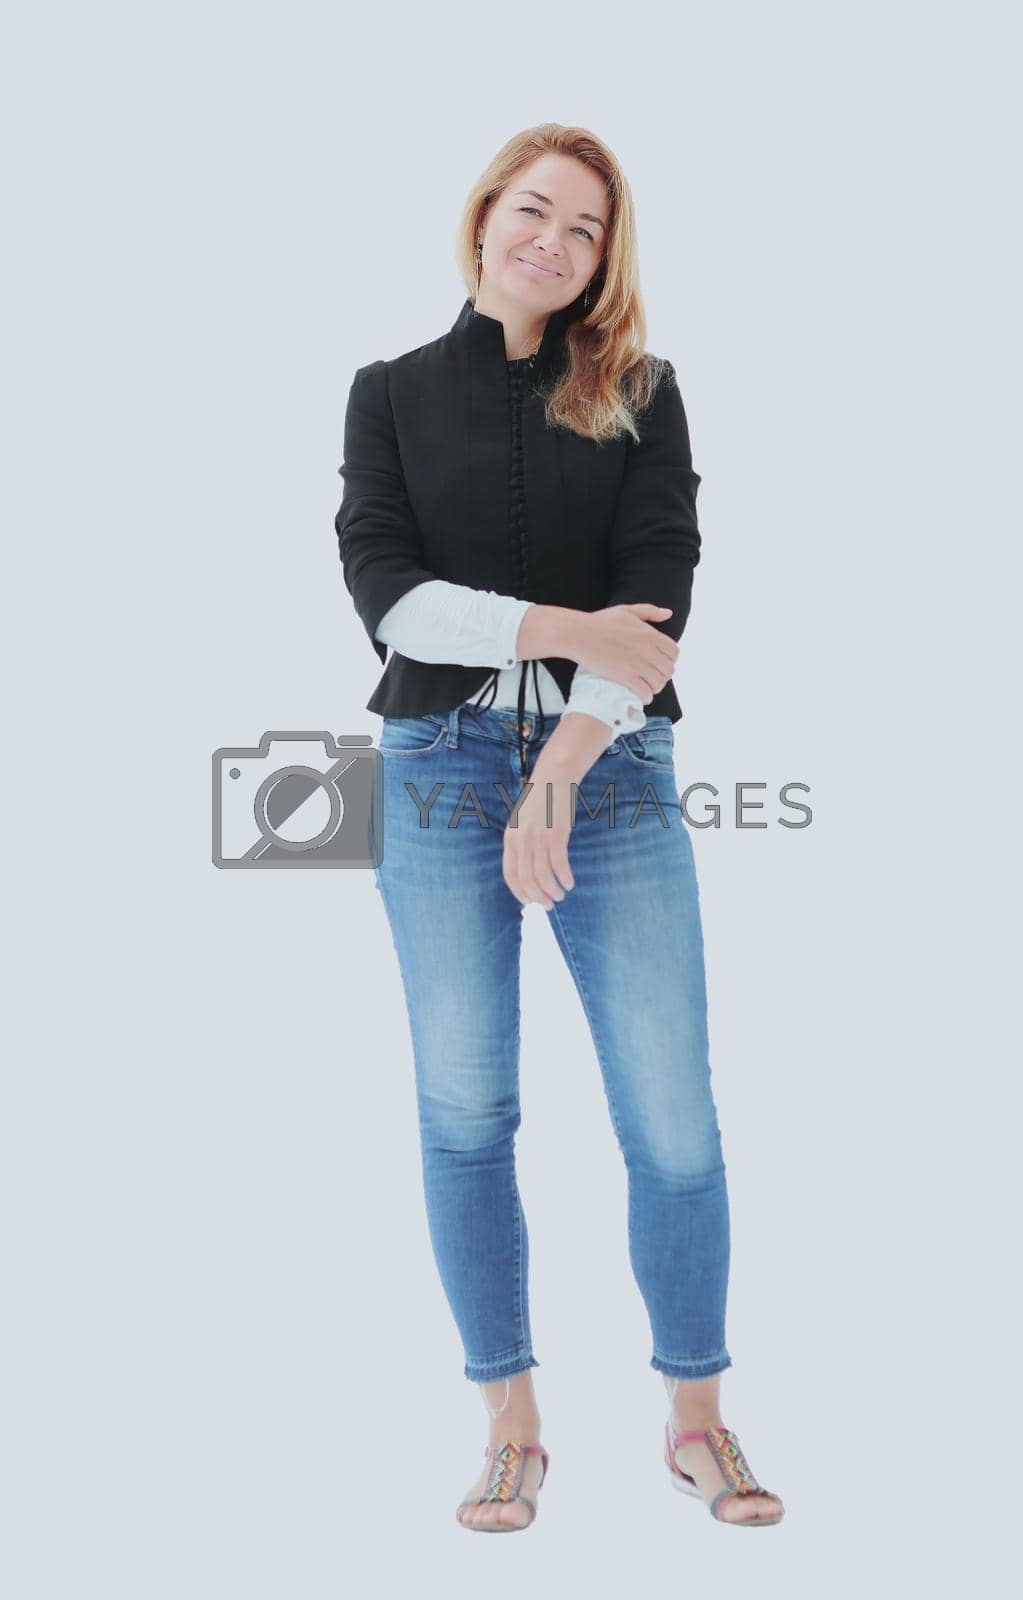 Royalty free image of in full growth. a young woman in jeans and a black blouse by asdf